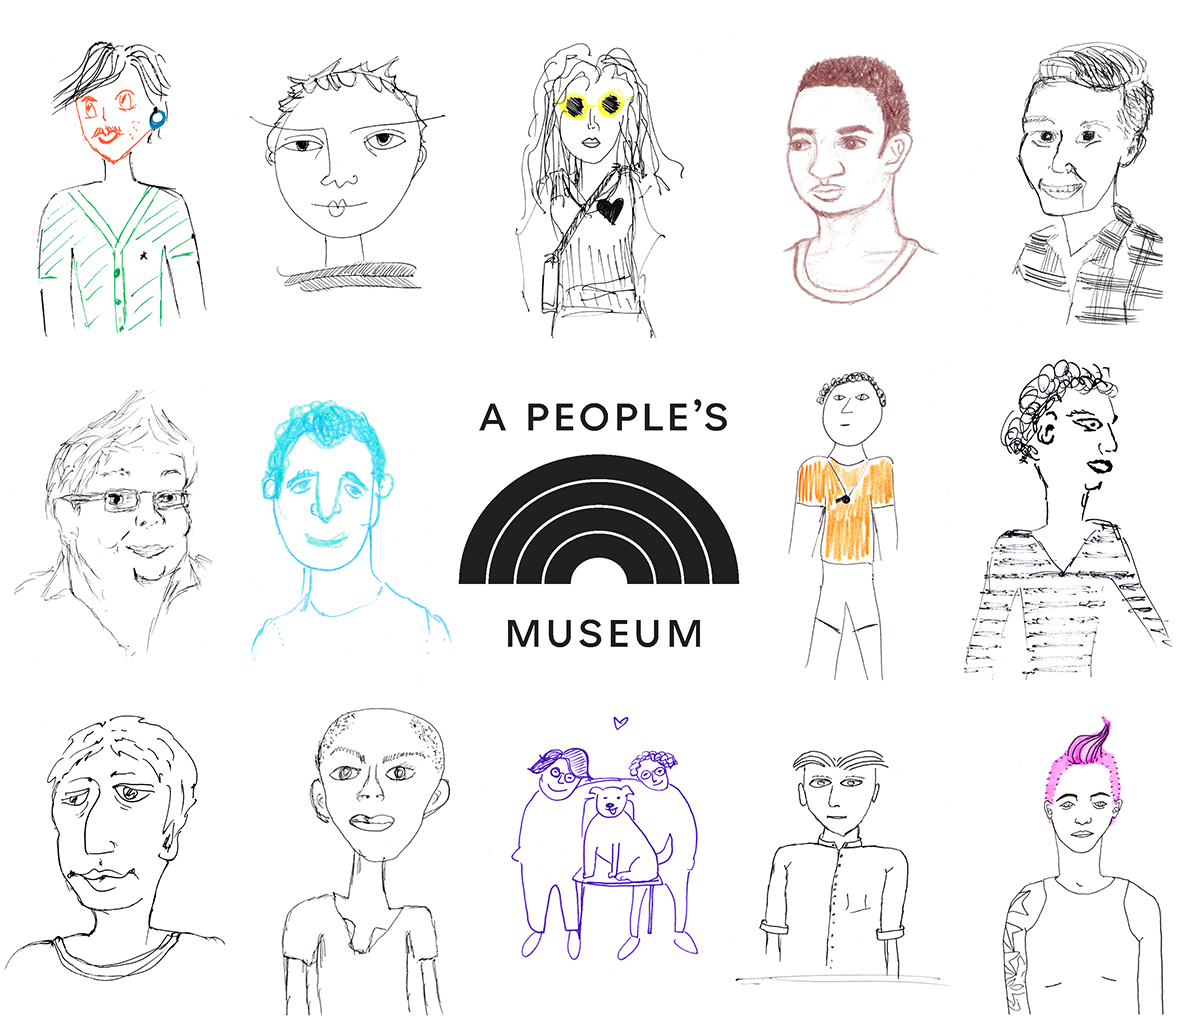 Sketches of 14 people for A People's Museum of LGBTQ history exhibition